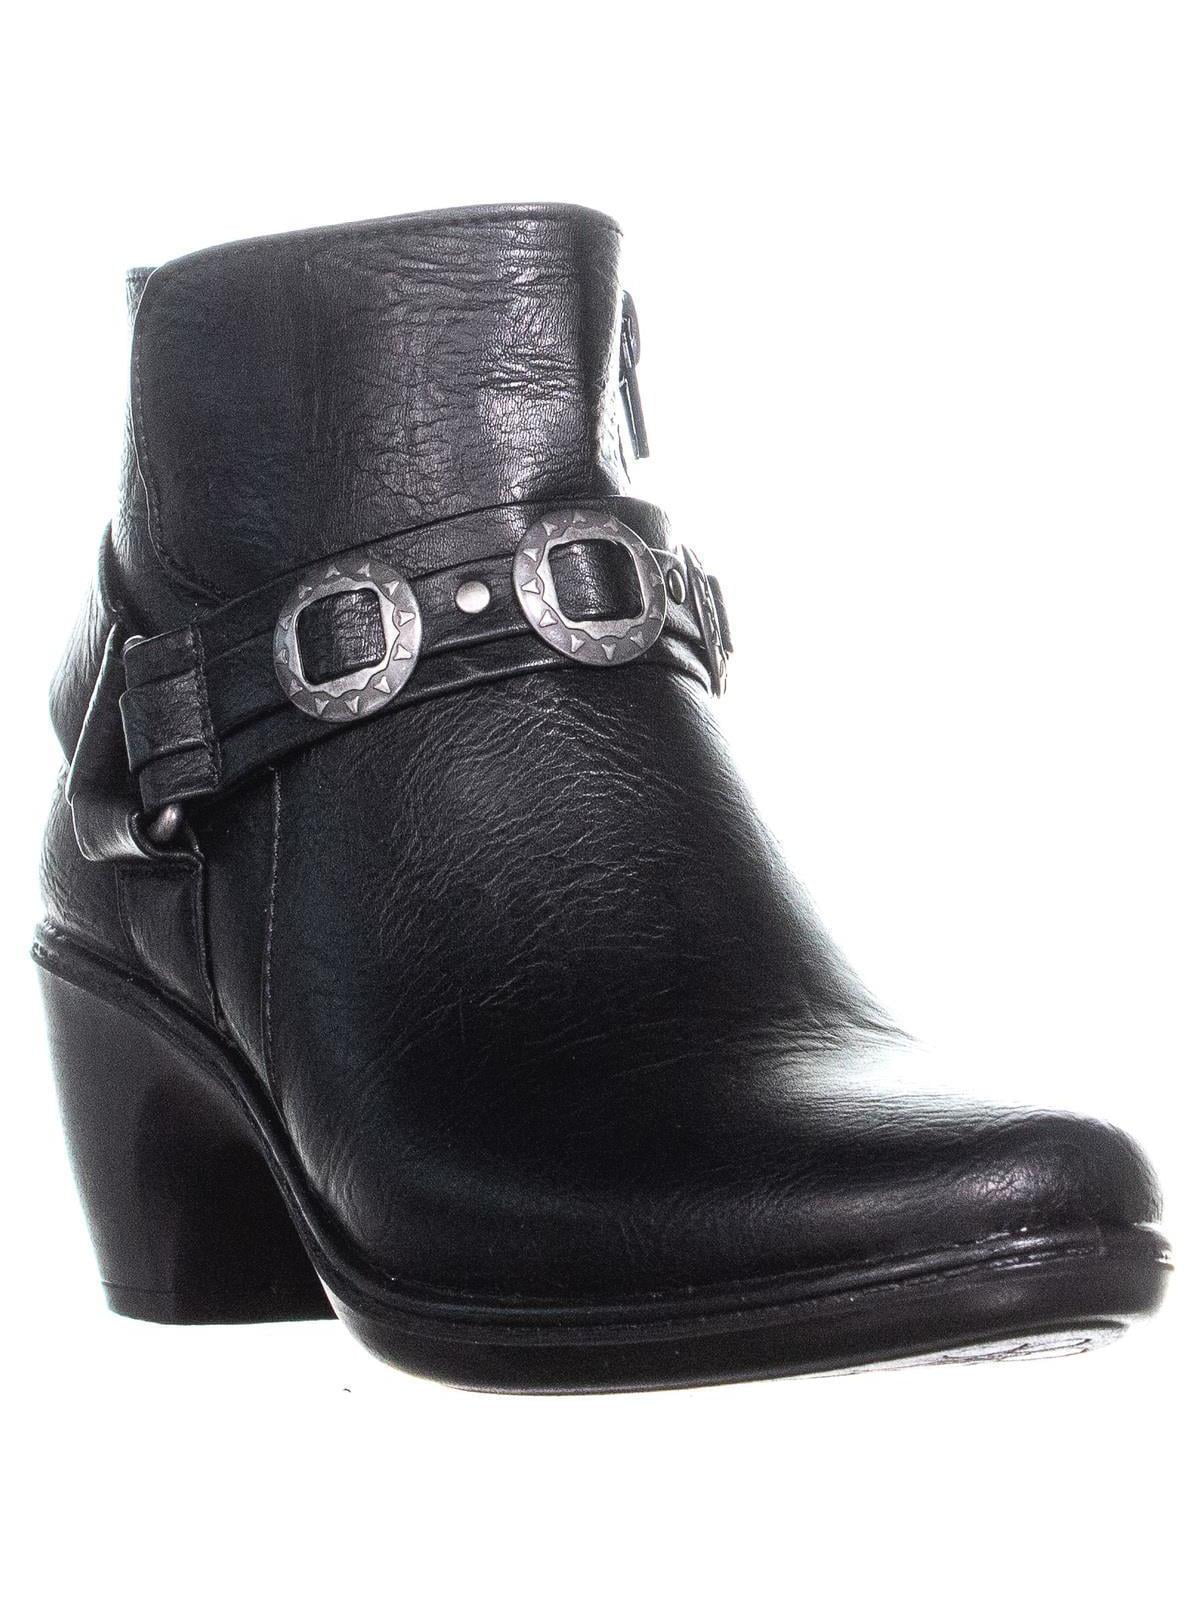 Easy Street Womens Bailey Ankle Boot